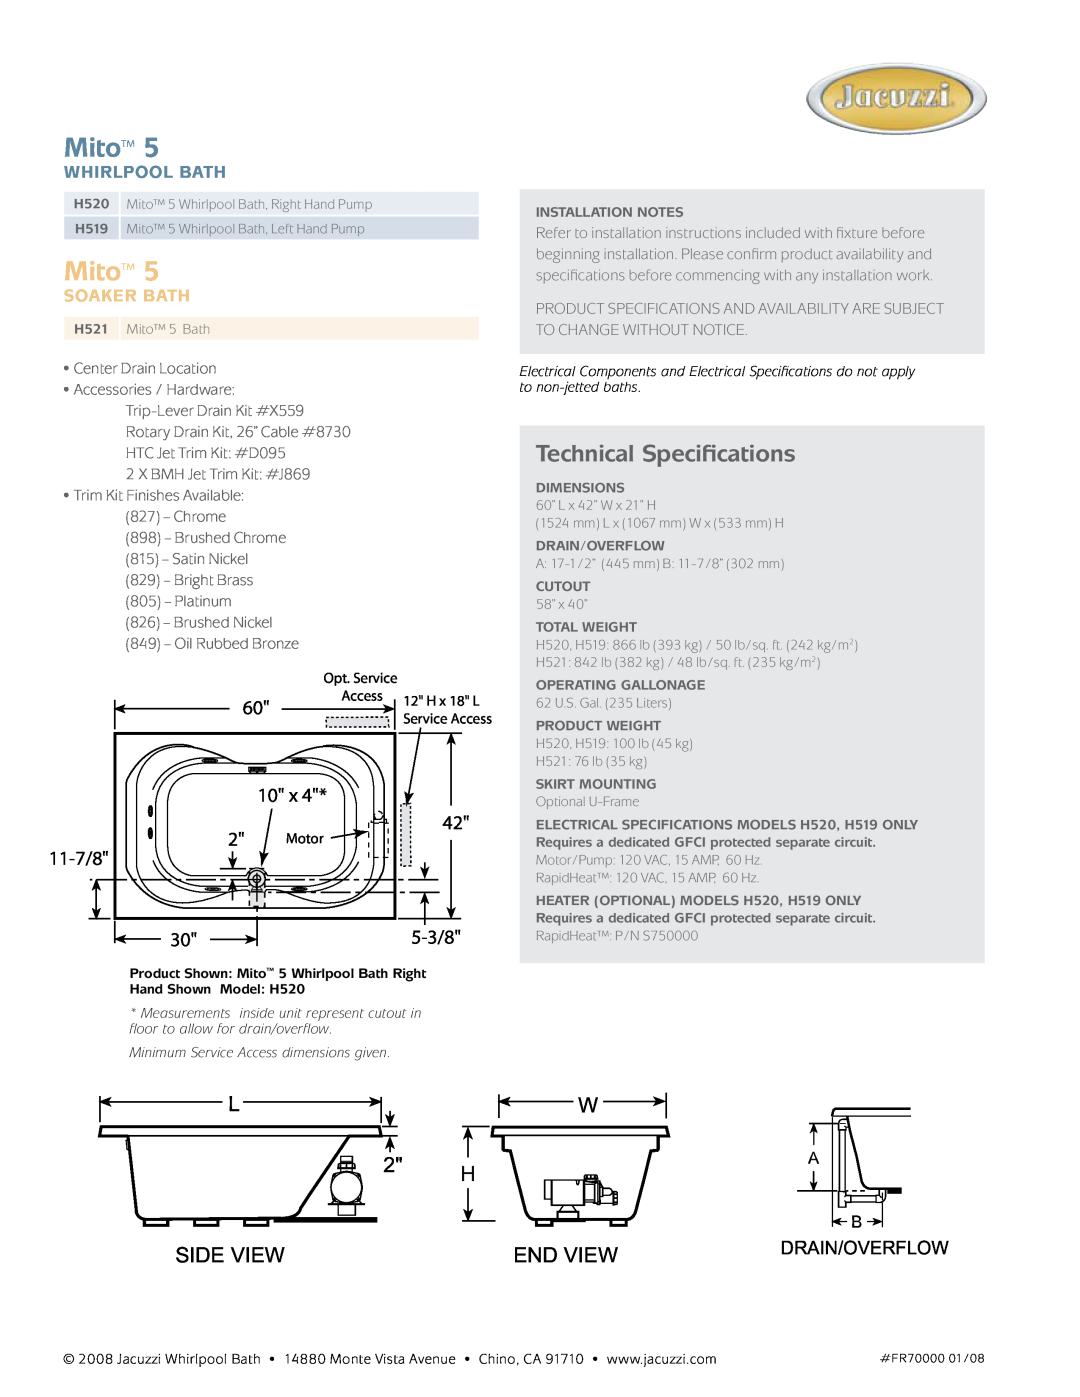 Jacuzzi HS19, HS20 Mito, Technical Specifications, L Side View, End View, 11-7/8, 5-3/8, Drain/Overflow, Whirlpool Bath 